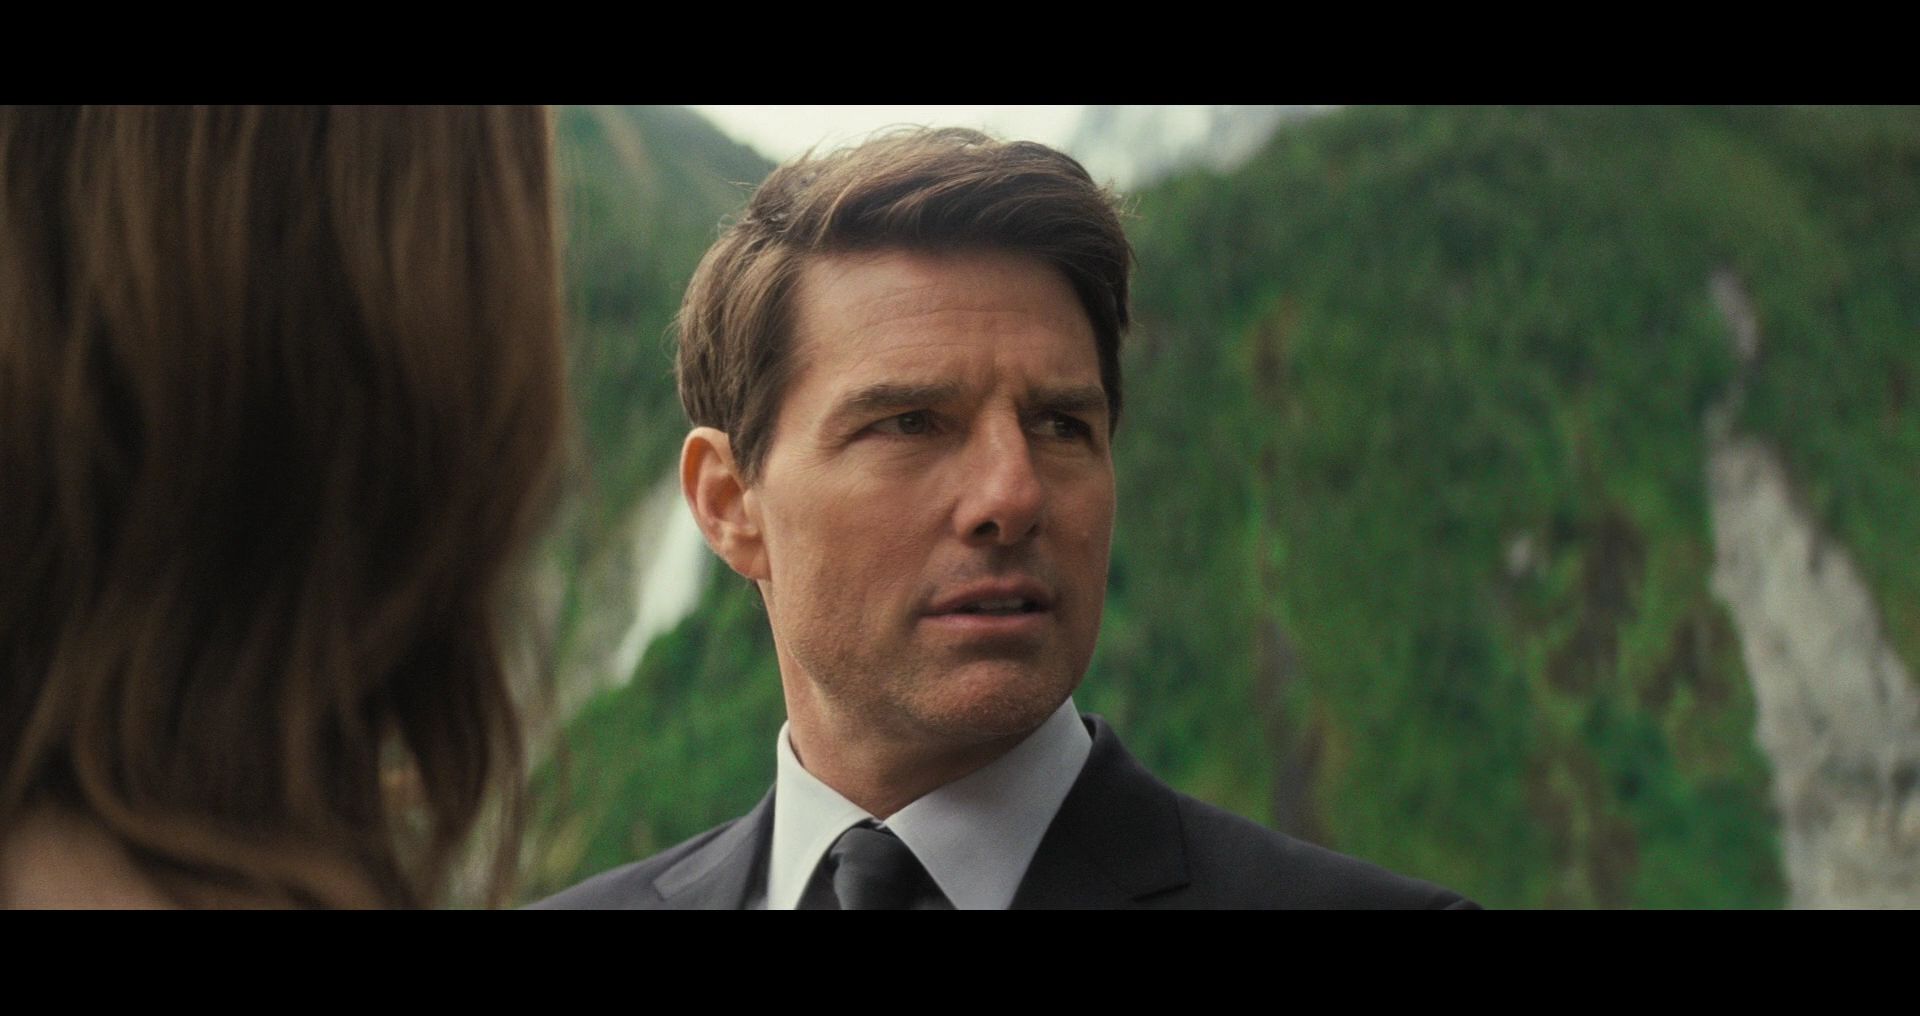 Mission-Impossible-Fallout-0029.jpg